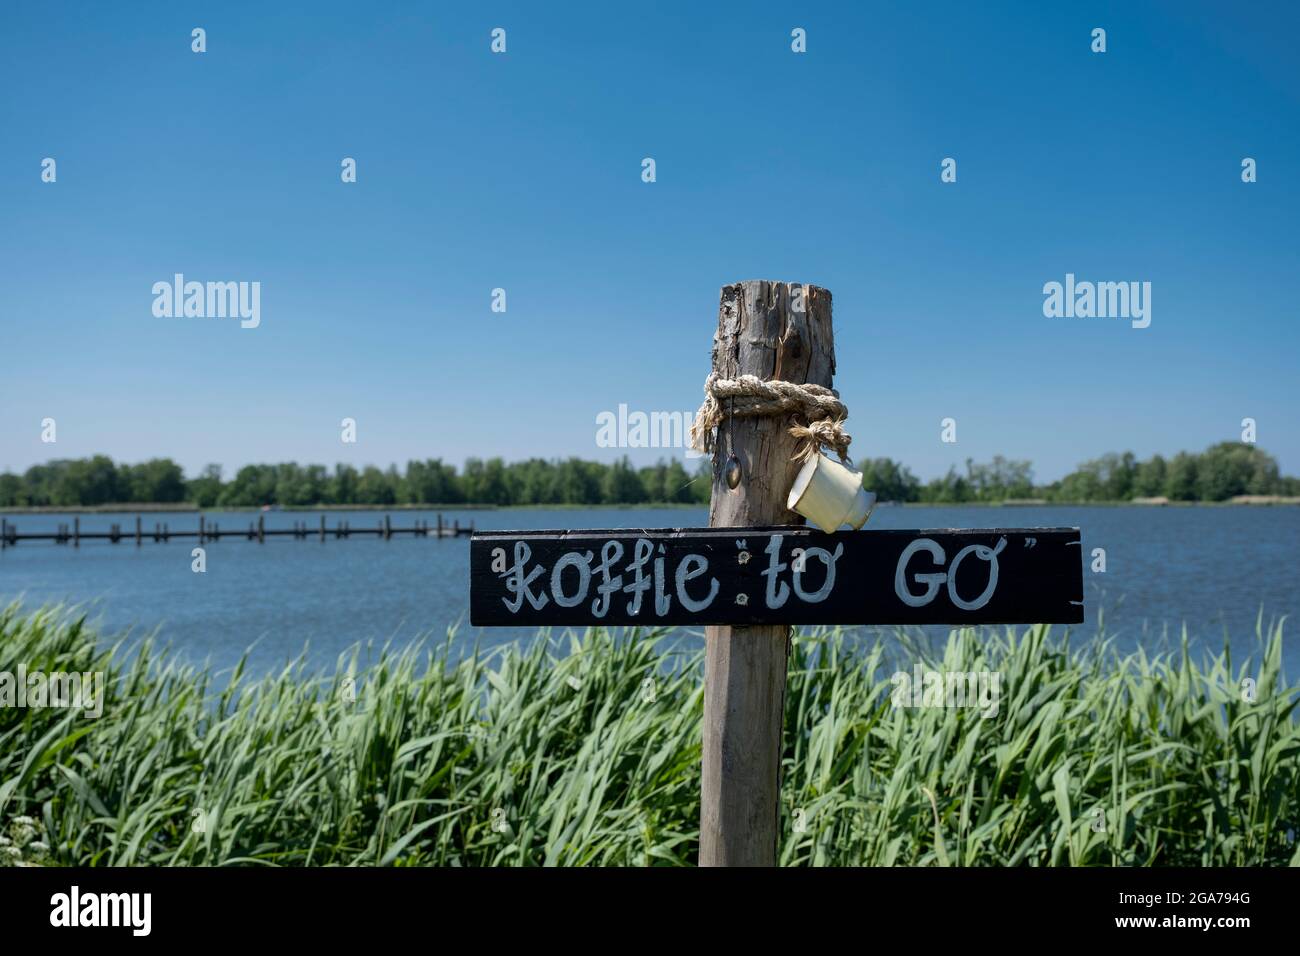 Wooden Sign with dutch words koffie to go 'Coffee to go' on the background of wooden board in a outside environment in the Netherlands Stock Photo